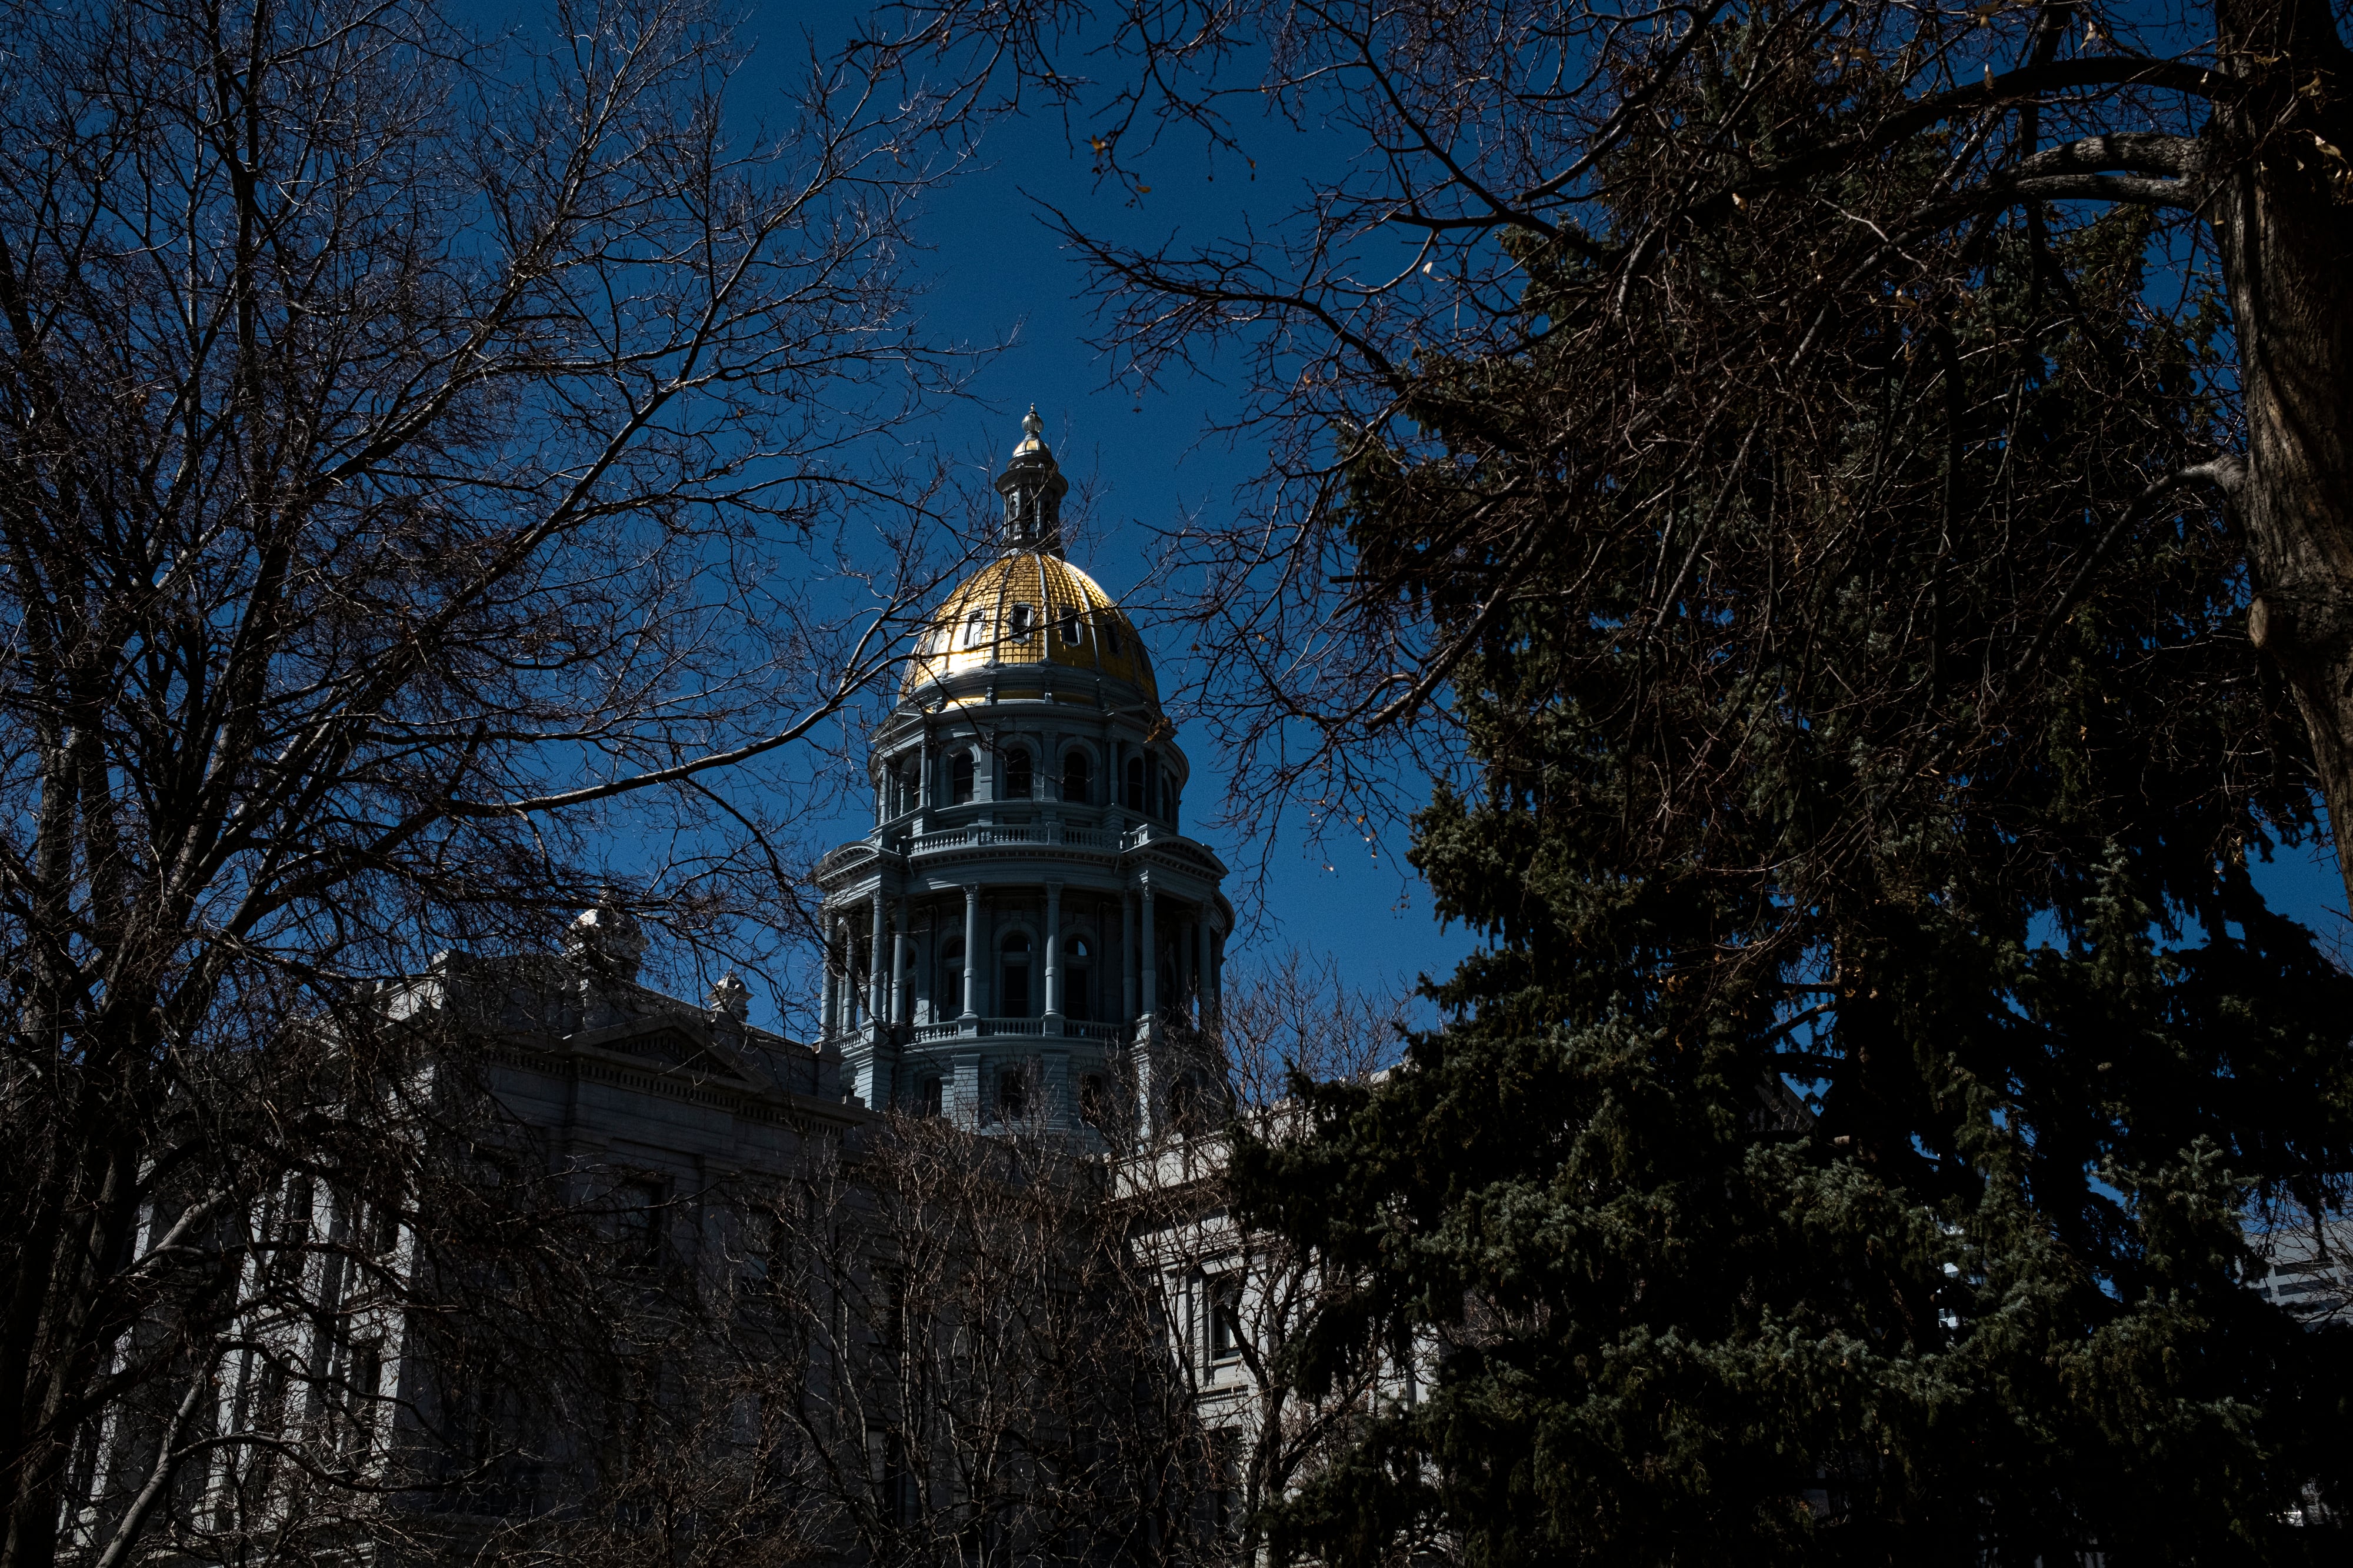 The Colorado State Capitol against a blue sky with trees in the foreground.